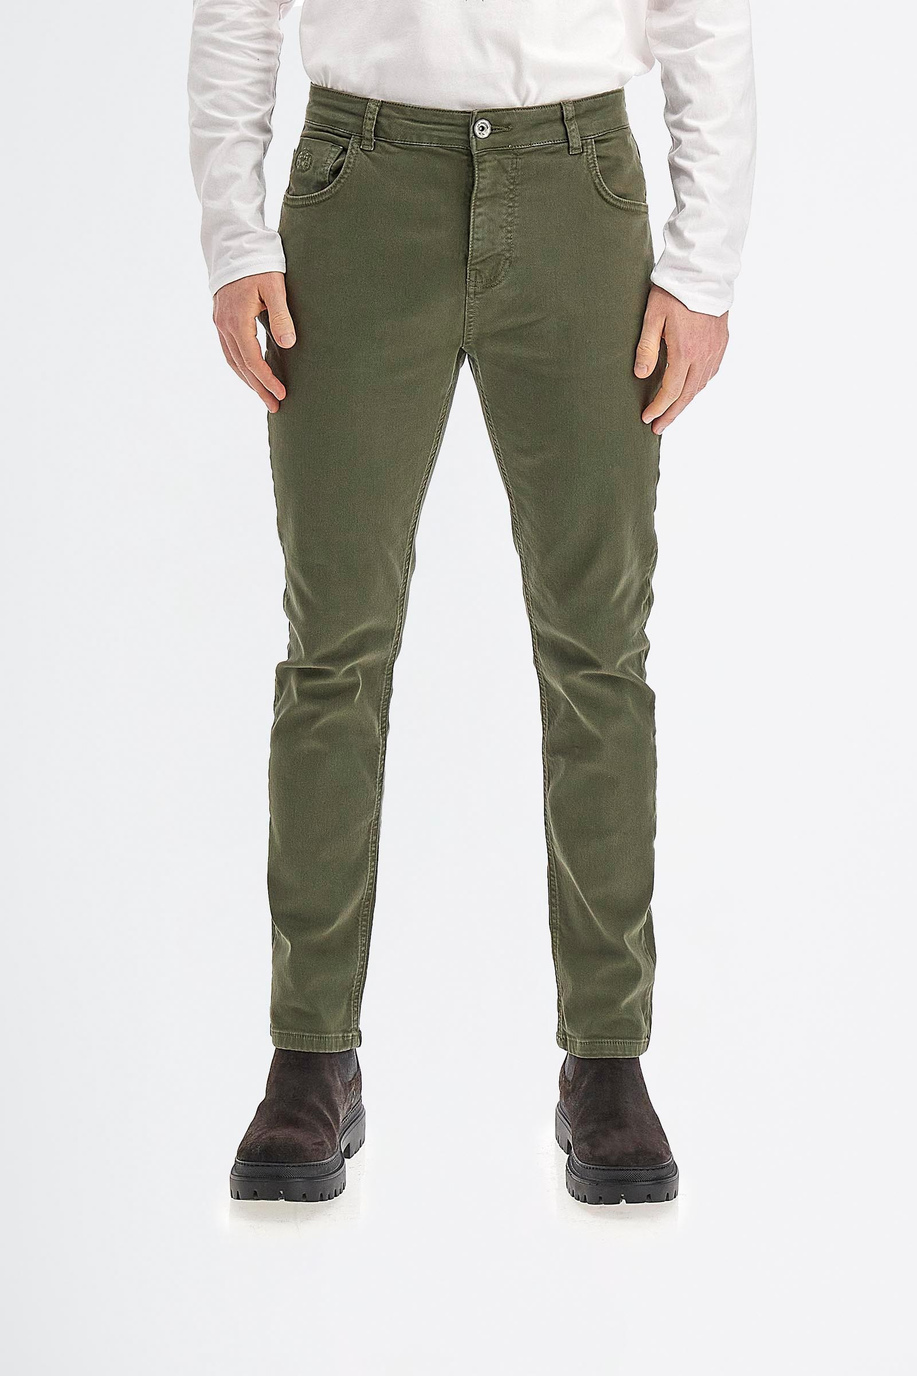 Men’s trousers in stretch cotton regular fit chino model - Trousers | La Martina - Official Online Shop